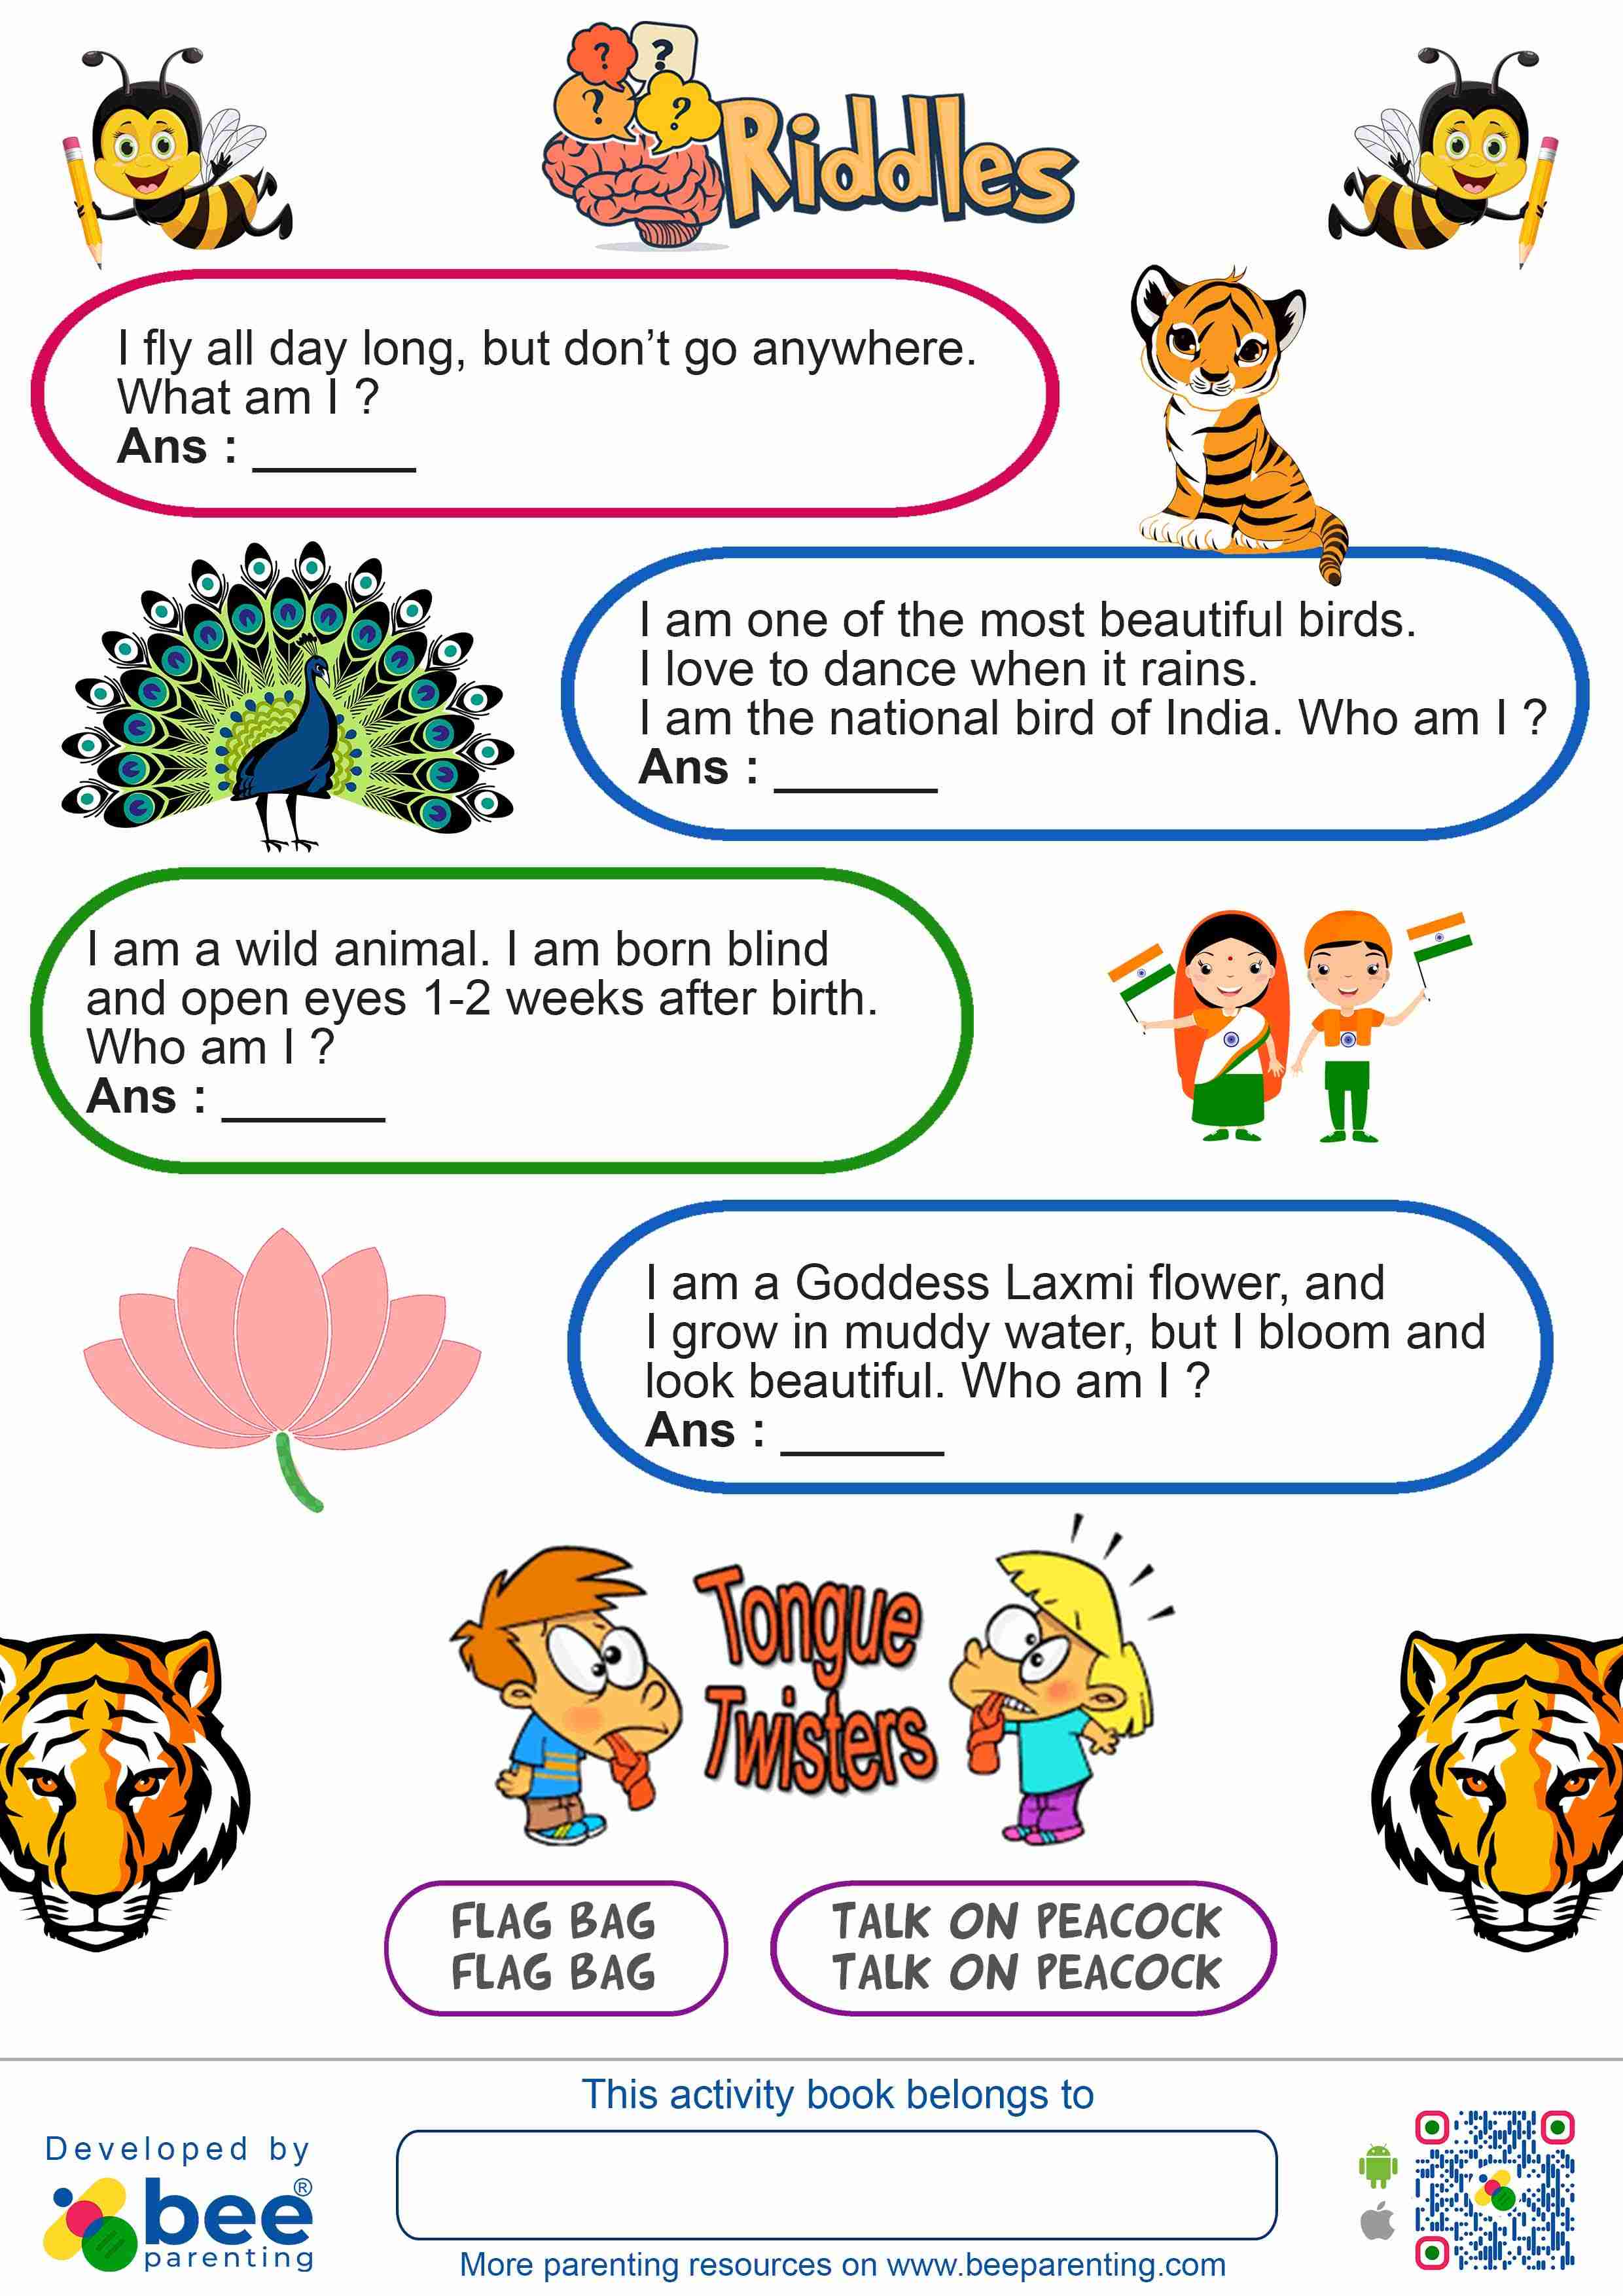 Indian Republic Day Riddles and Tongue Twisters